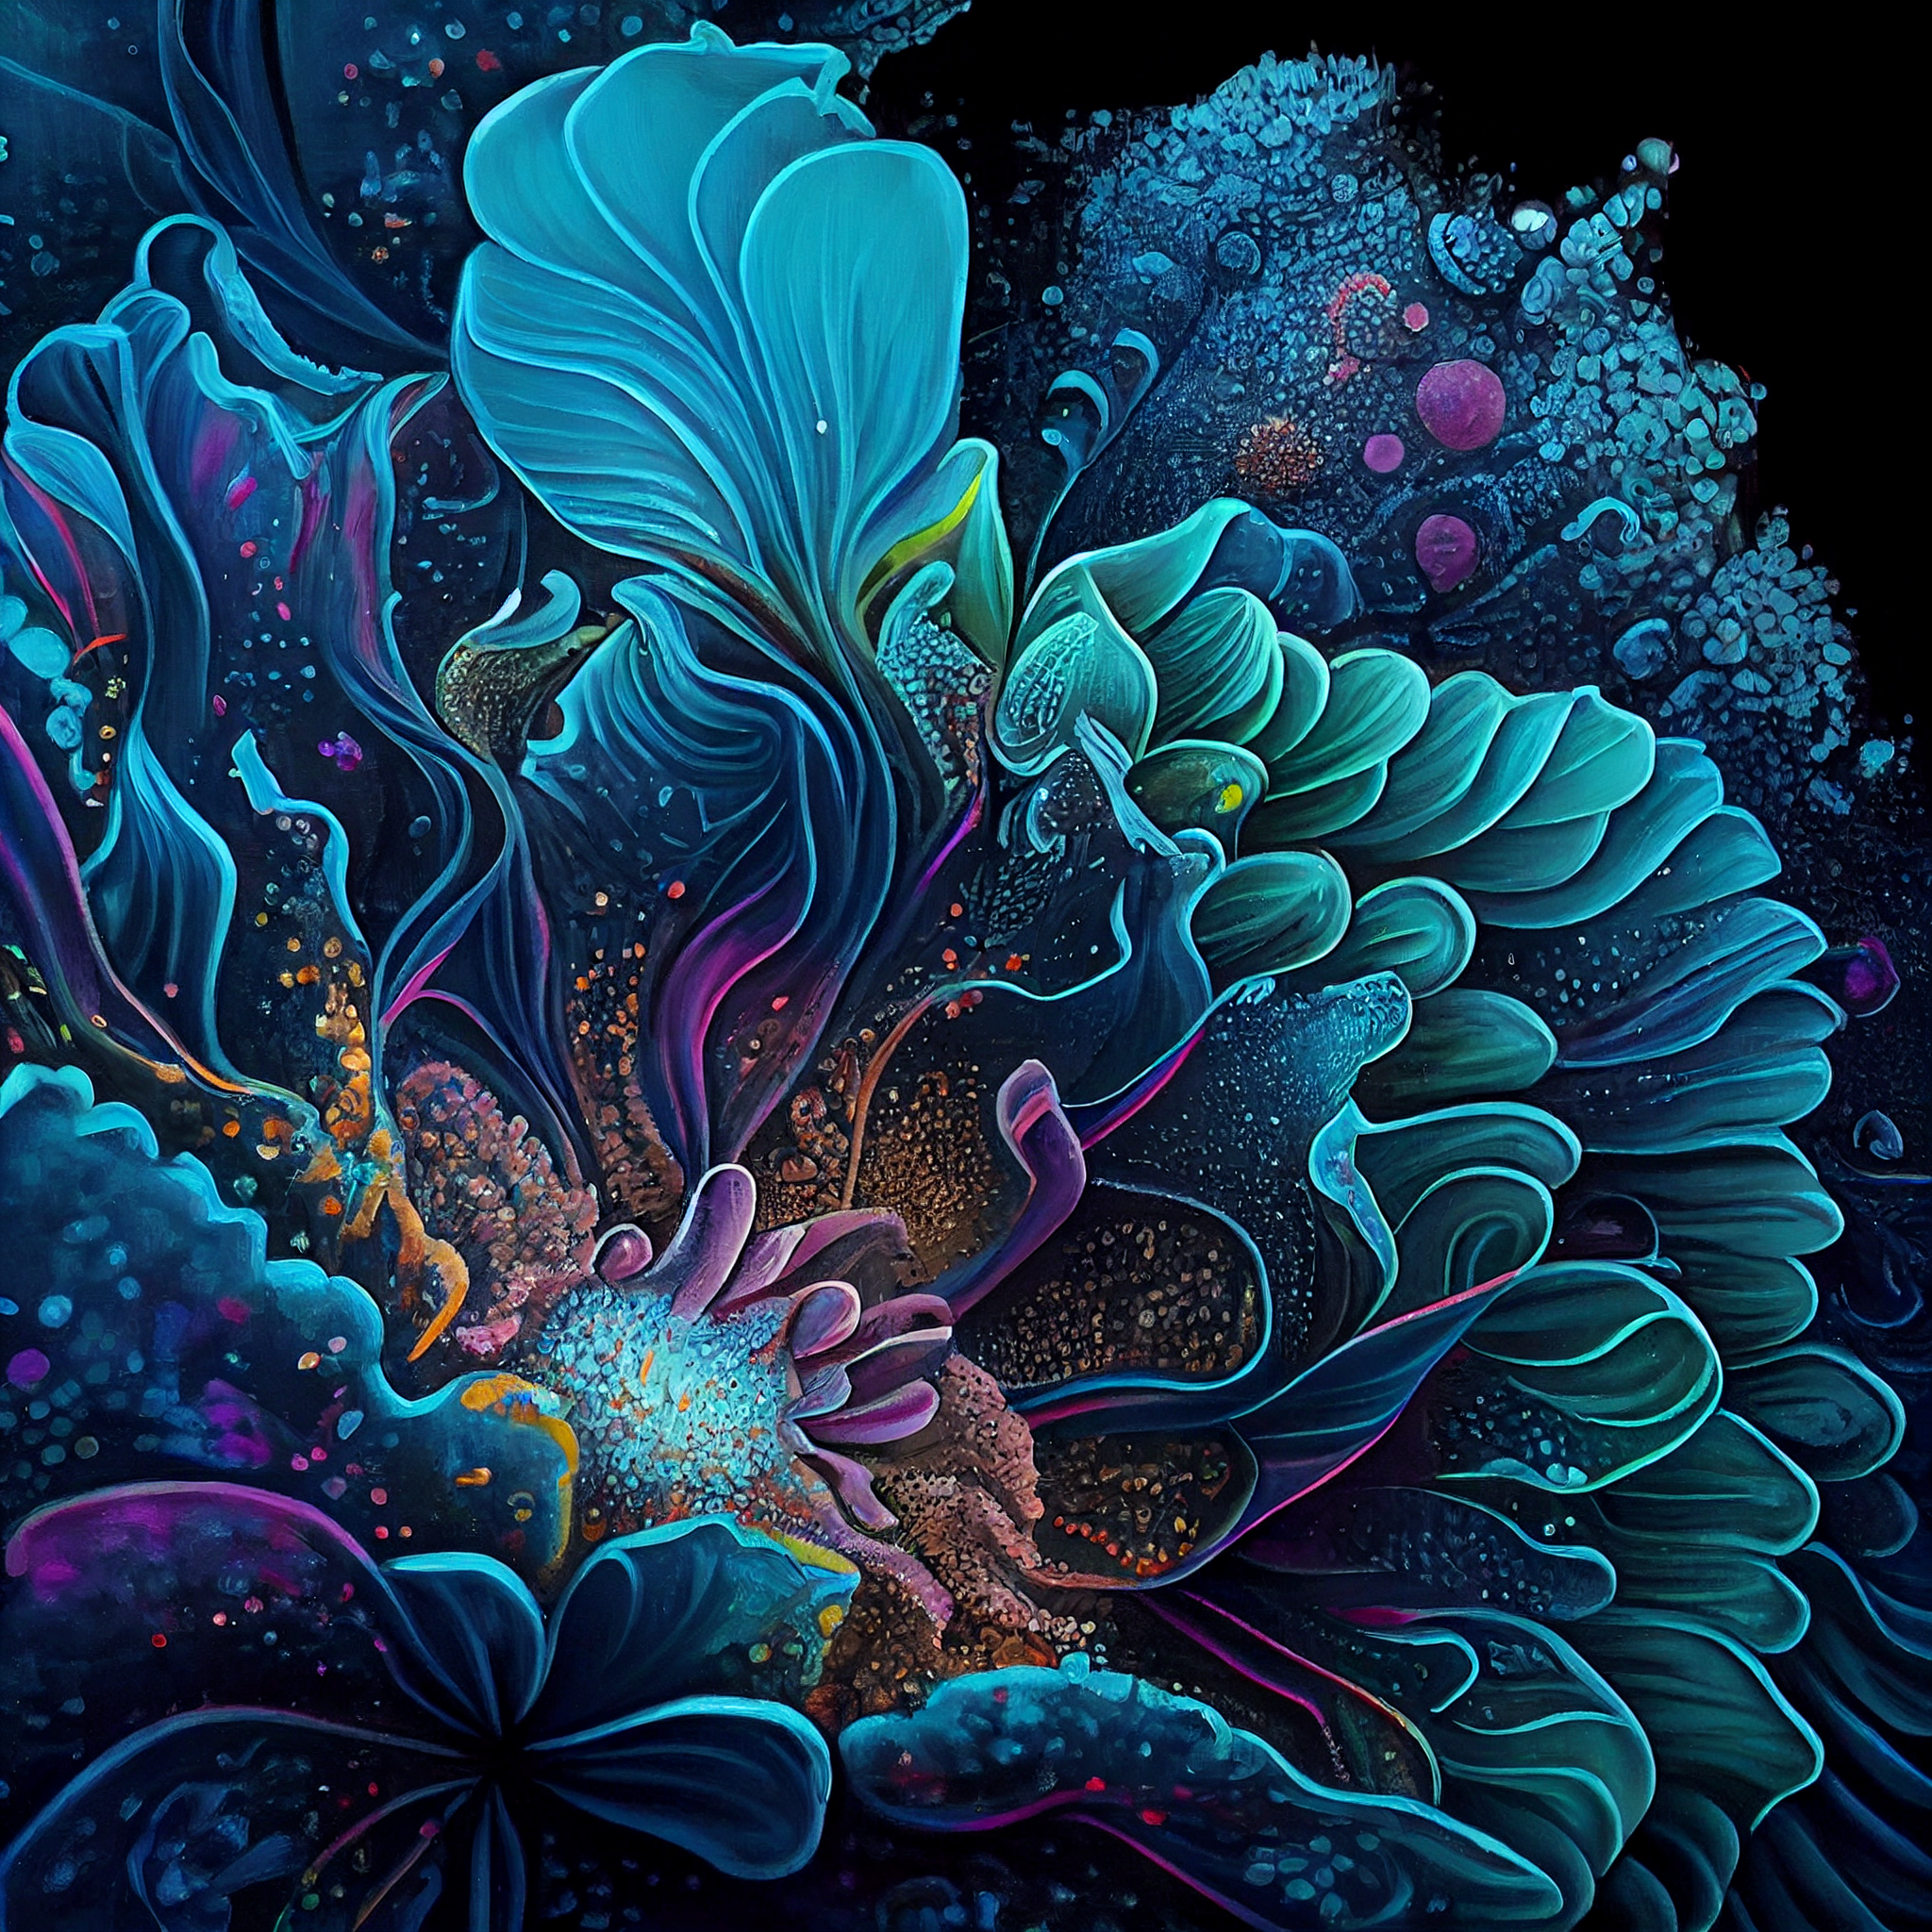 Extraterrestrial Blooms: Ultra-Detailed Illustrative Flowers in Rich Gradient Acrylic Painting Print